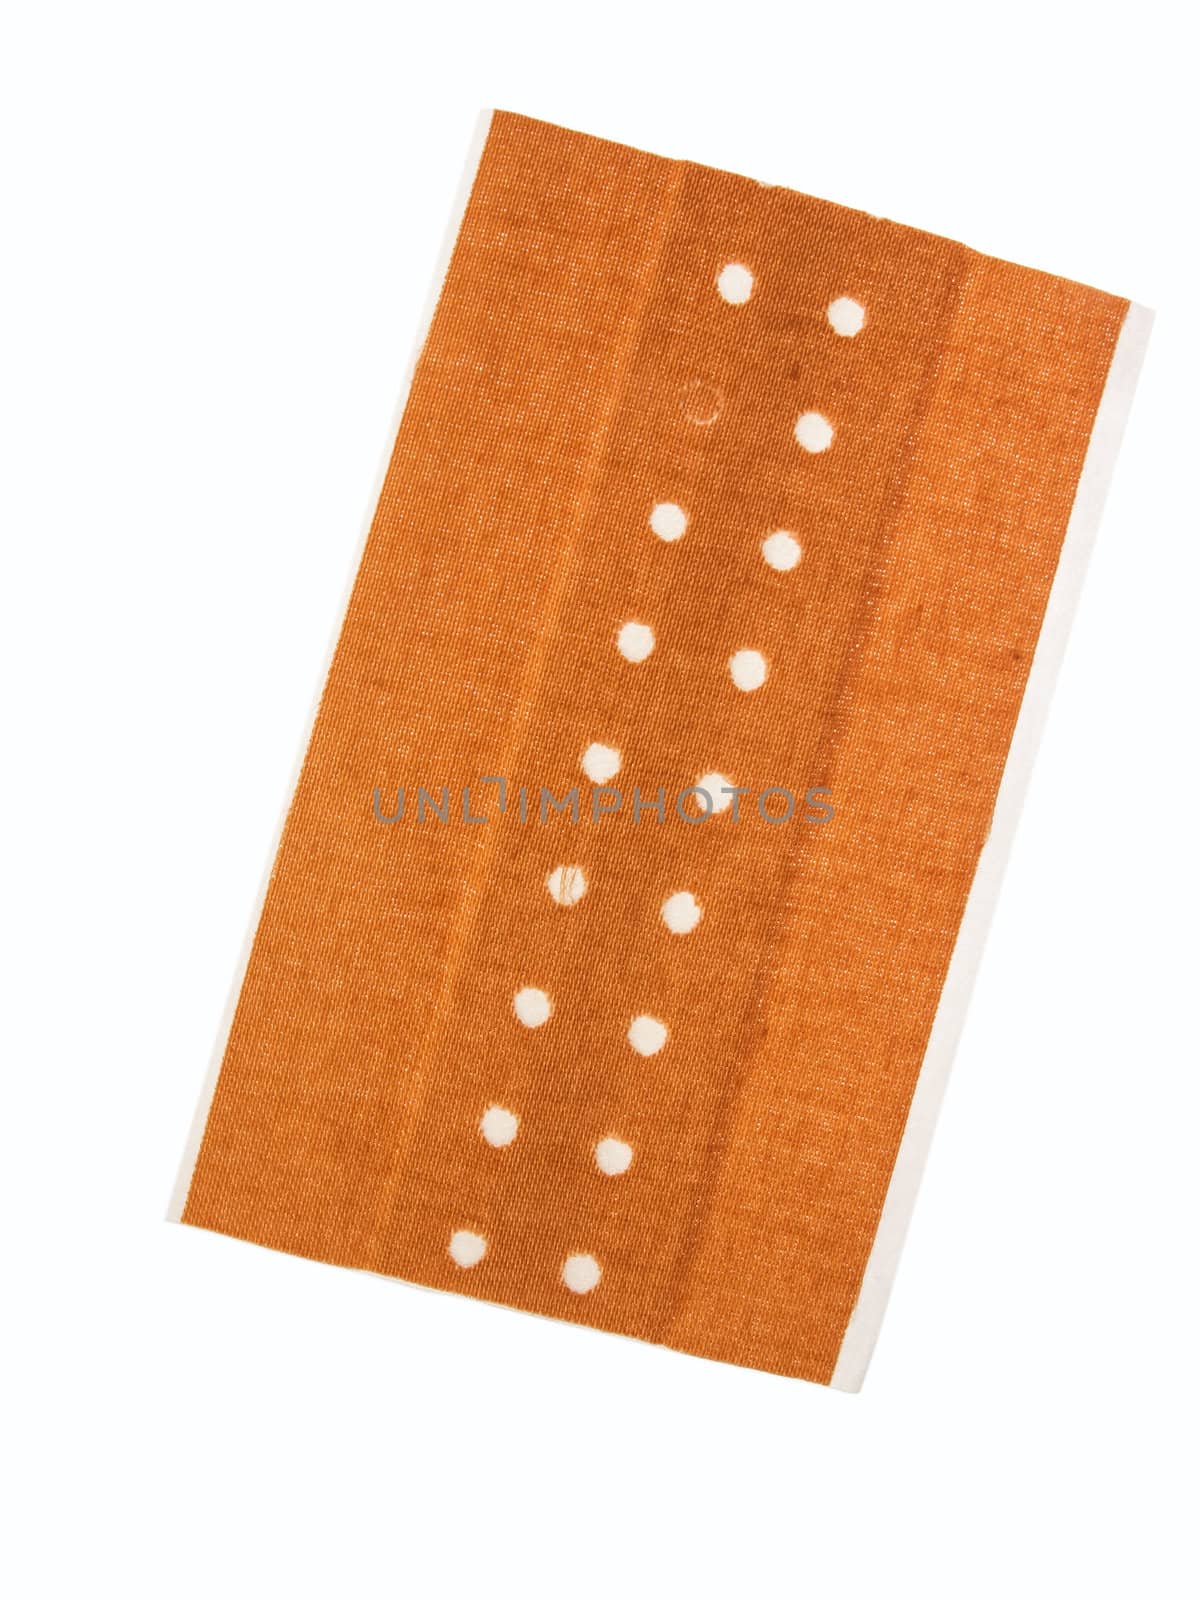 plasters on a white background